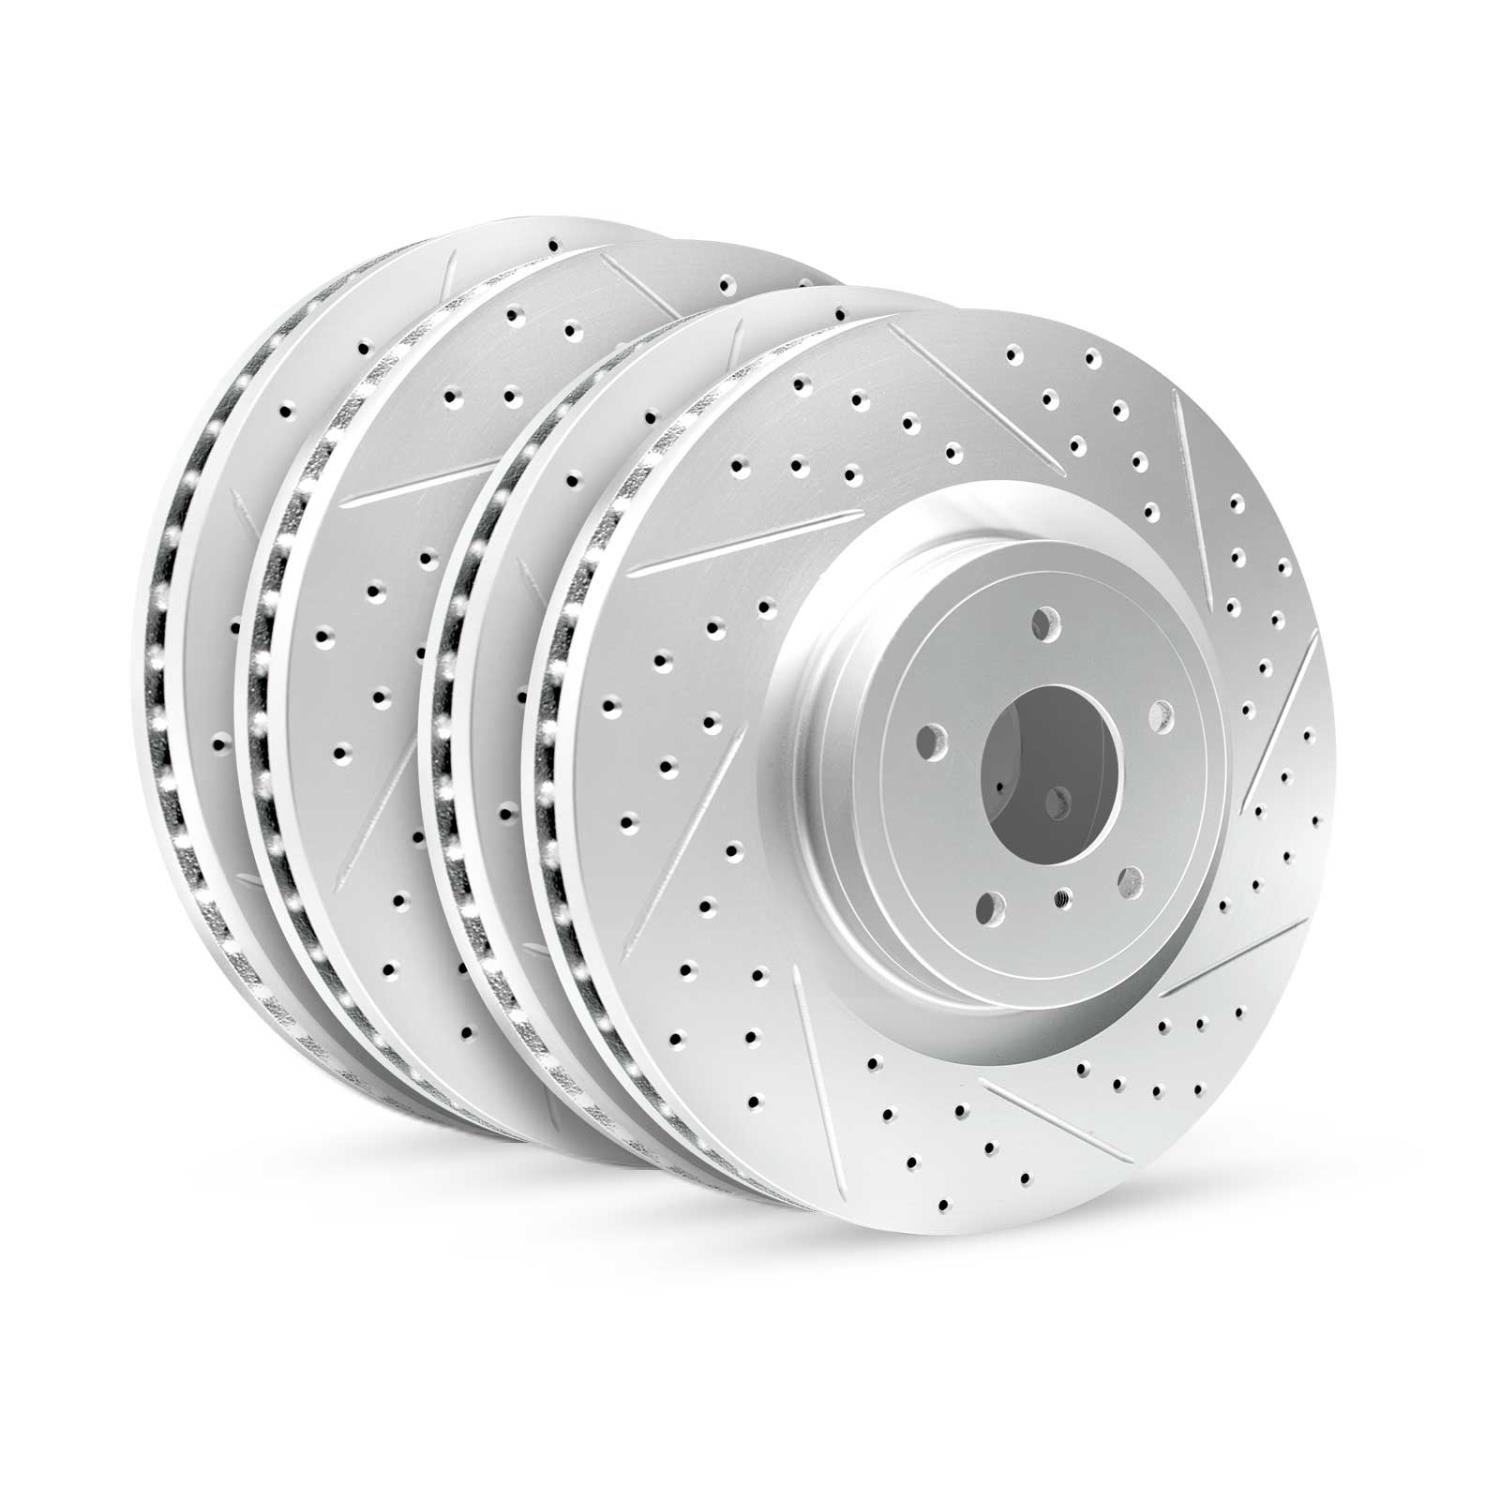 GEO-Carbon Drilled/Slotted Rotors, 2005-2008 BMW, Position: